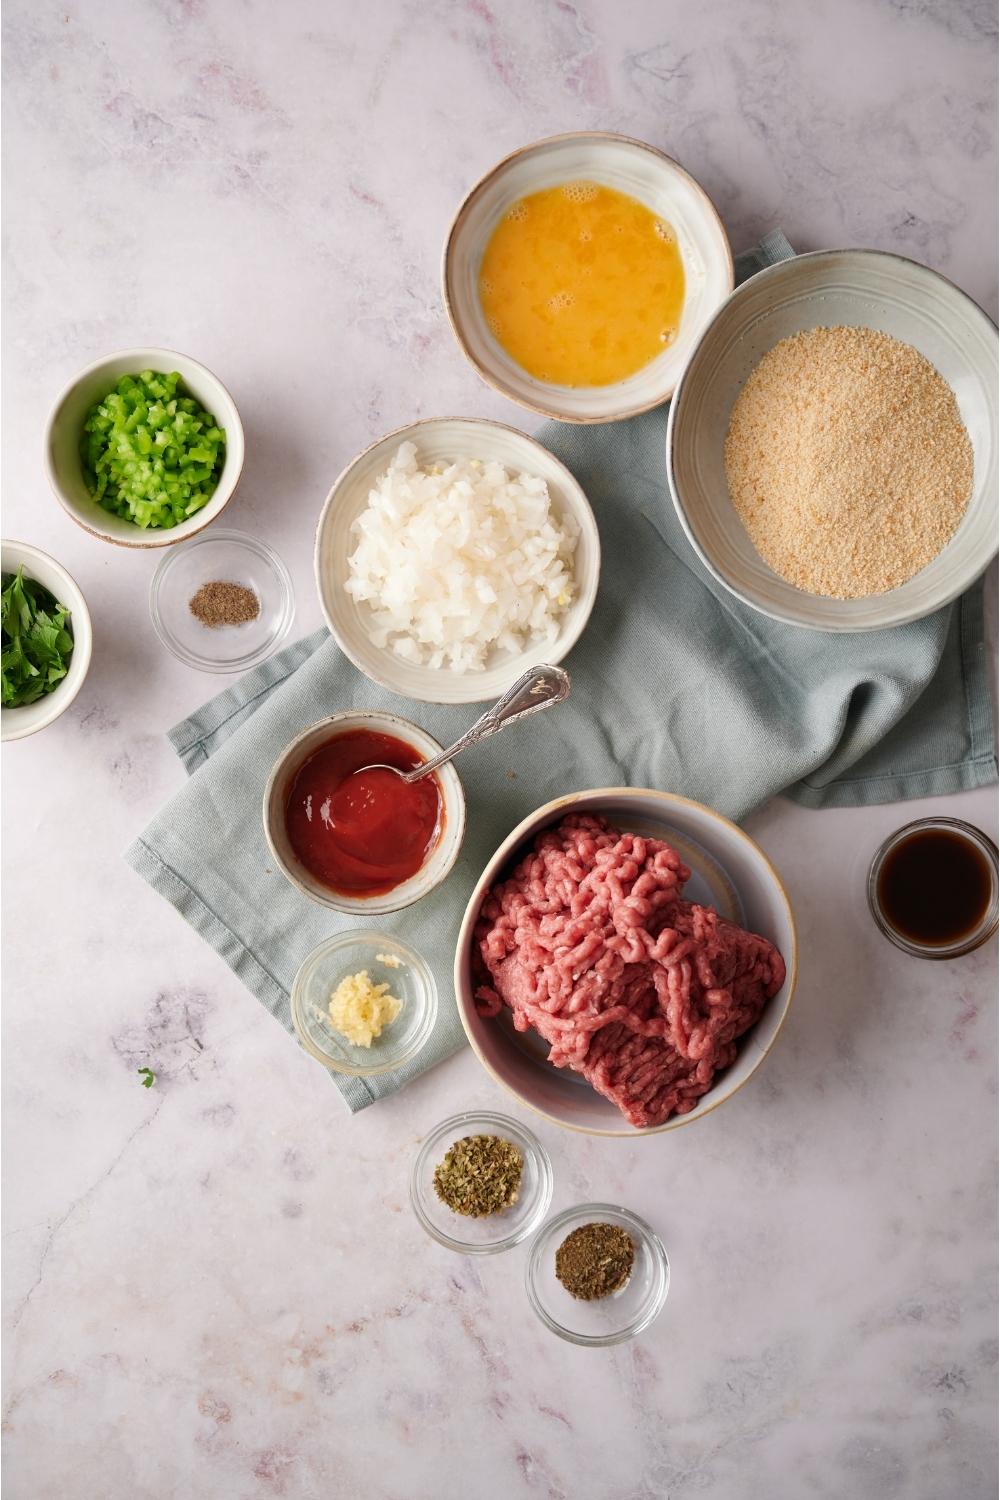 An assortment of ingredients including bowls of bread crumbs, egg, chopped onion, raw ground beef, ketchup, and seasonings. Most of the bowls are on a blue dish towel and everything is on a grey counter.